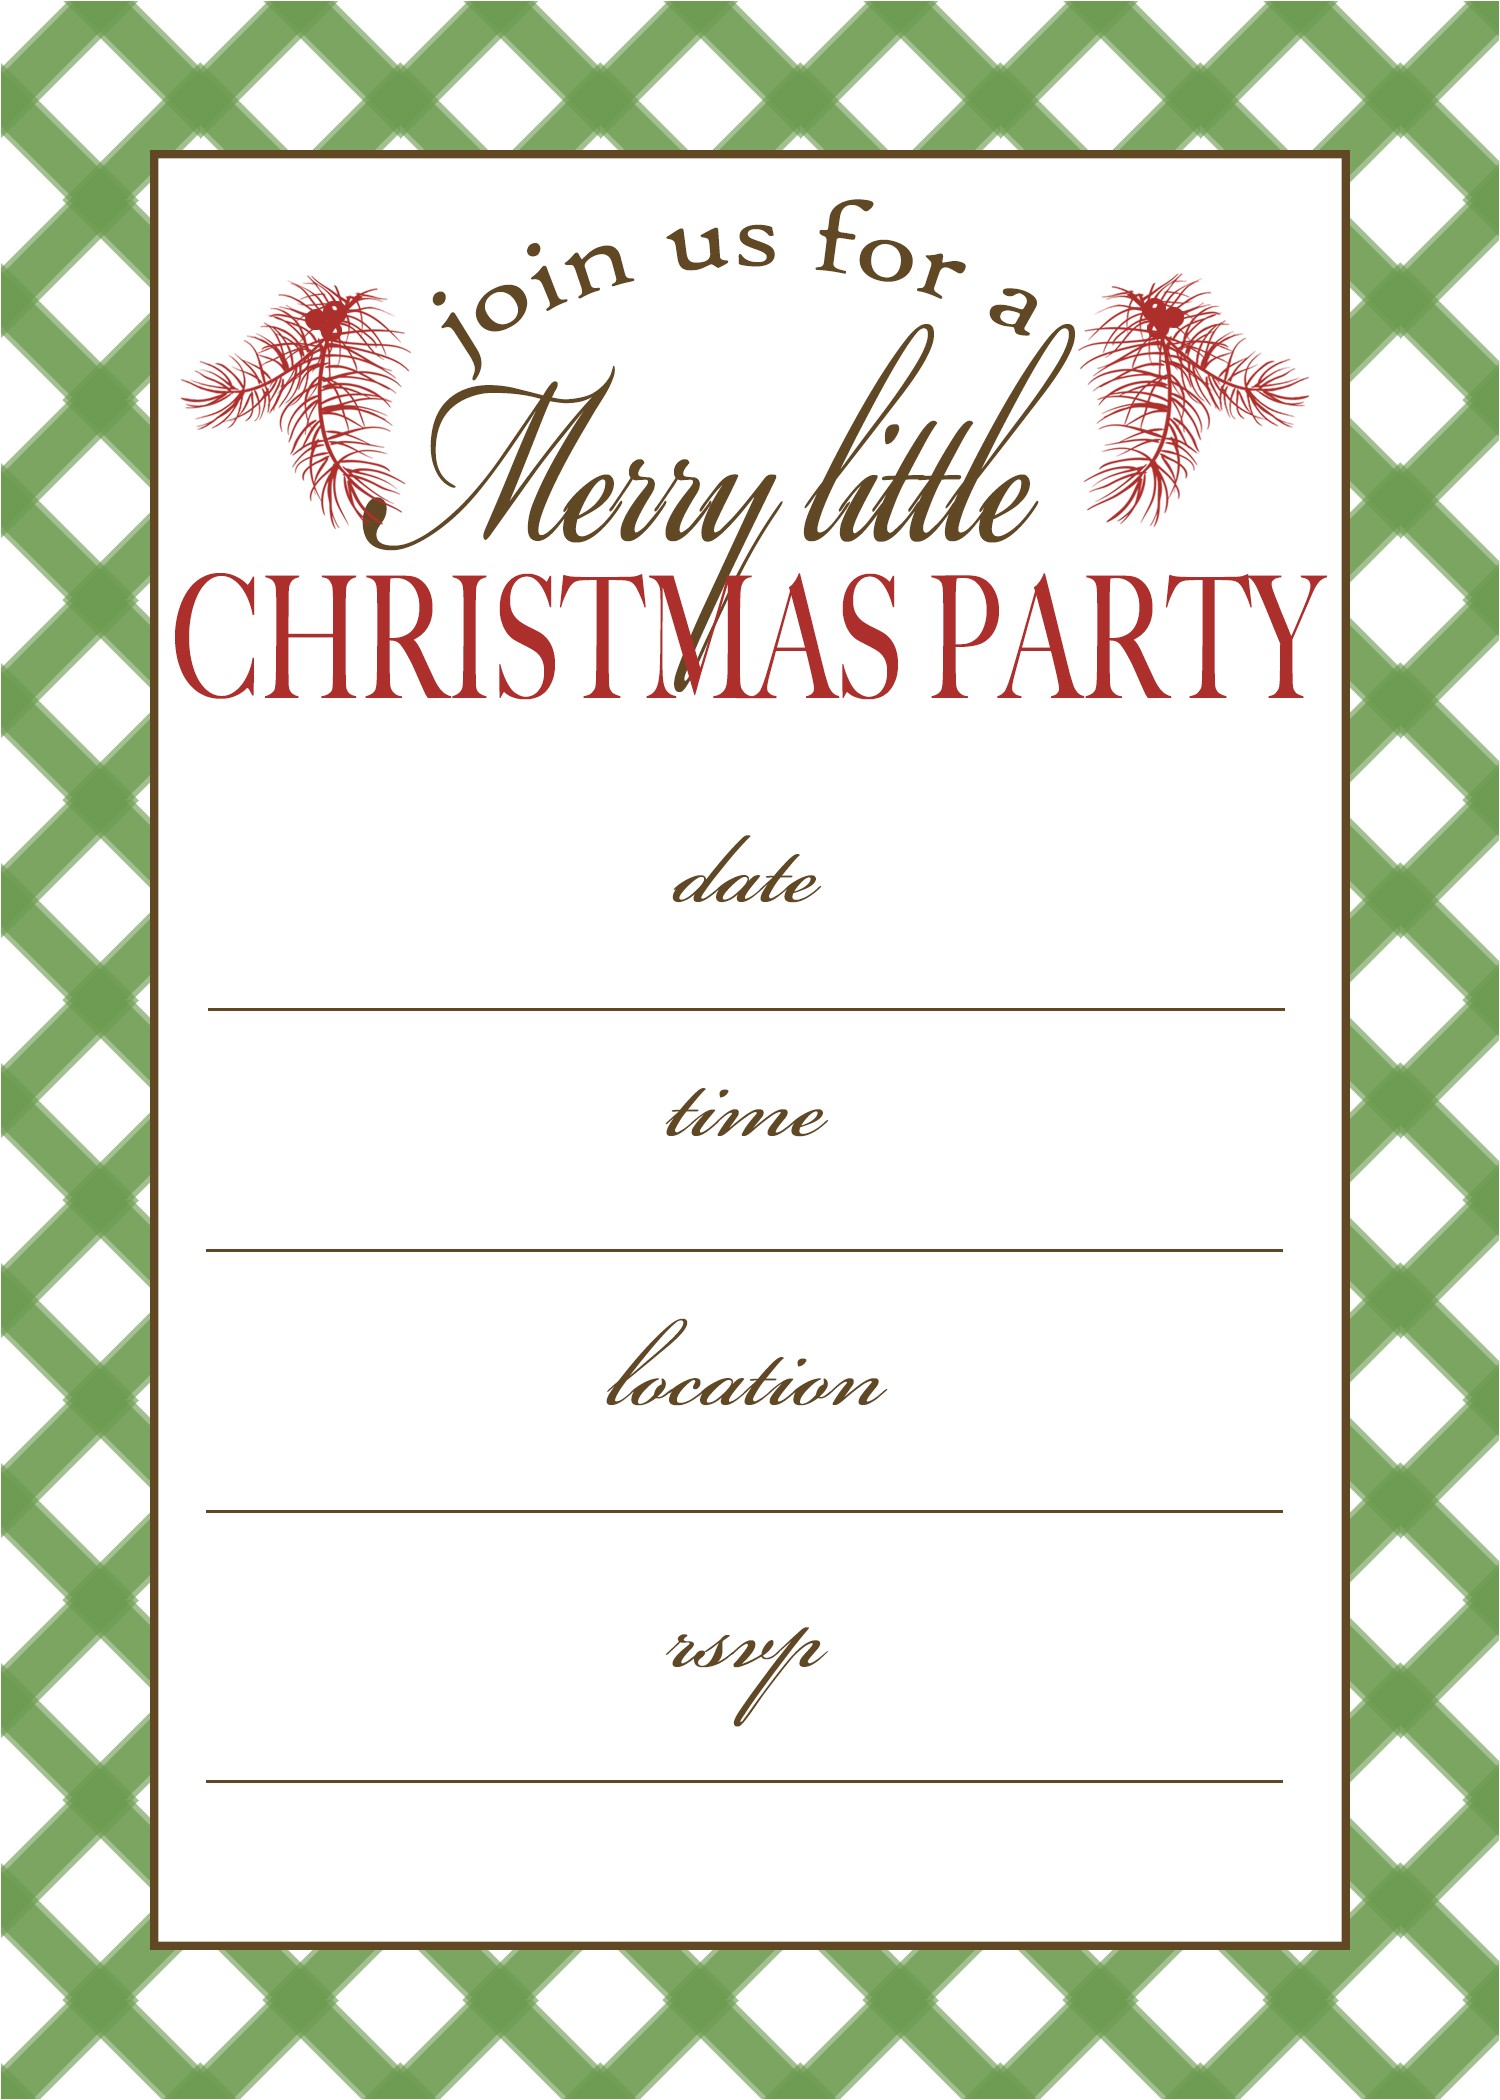 Printable Christmas Party Invite Template 7 Best Images Of Free Printable Christmas Invitation